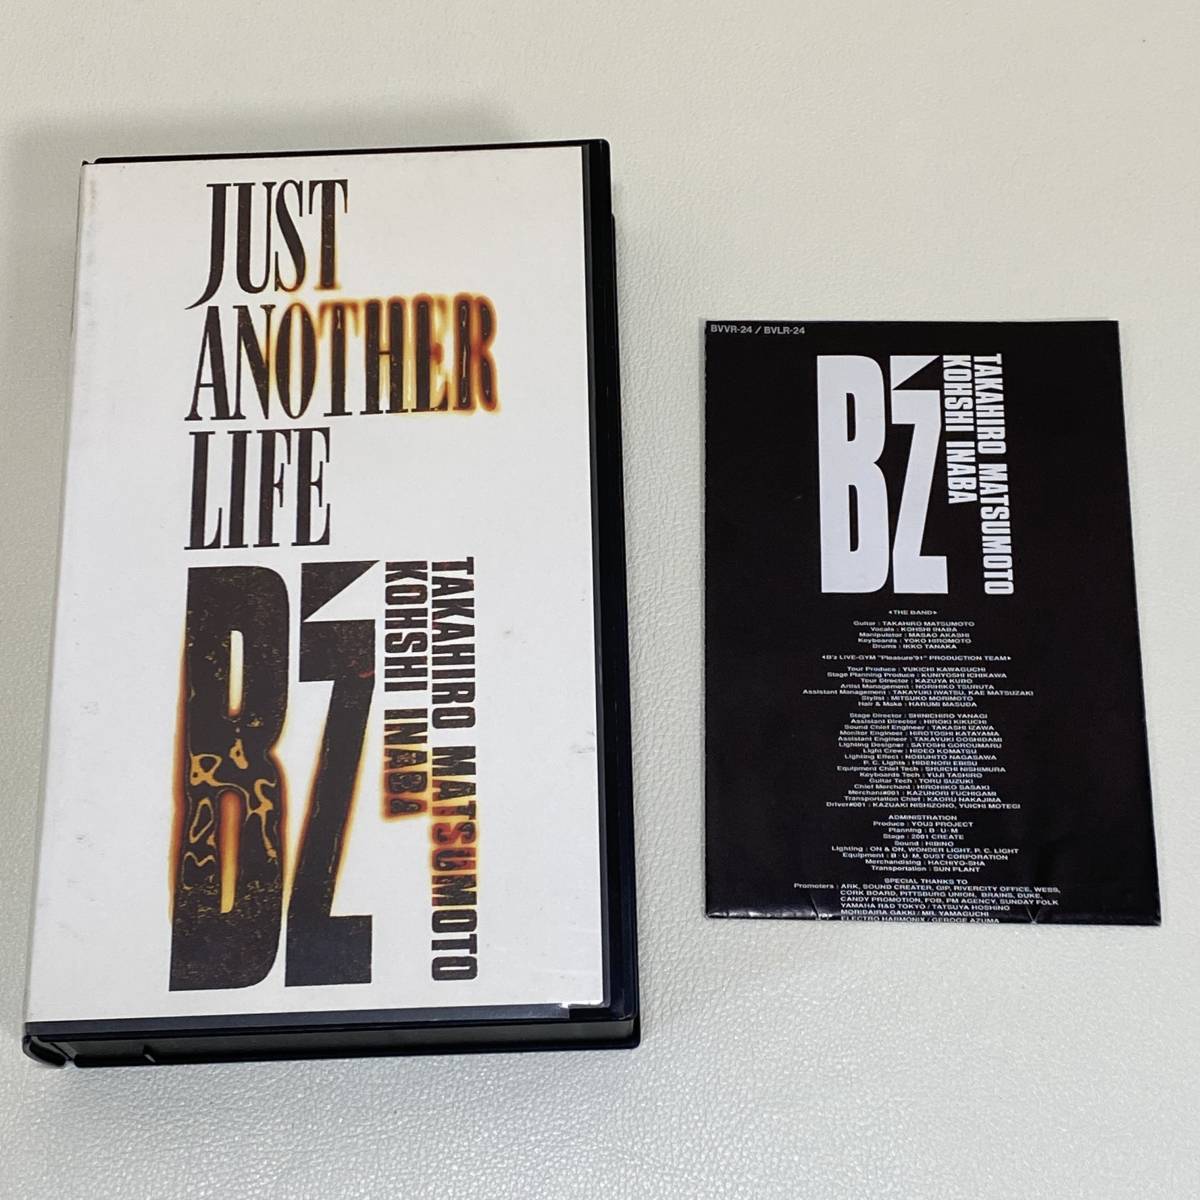 BA051 [VHS] B\'z JUST ANOTHER LIFE VHS videotape super valuable image Just hole The - life Inaba Koshi Matsumoto Takahiro 